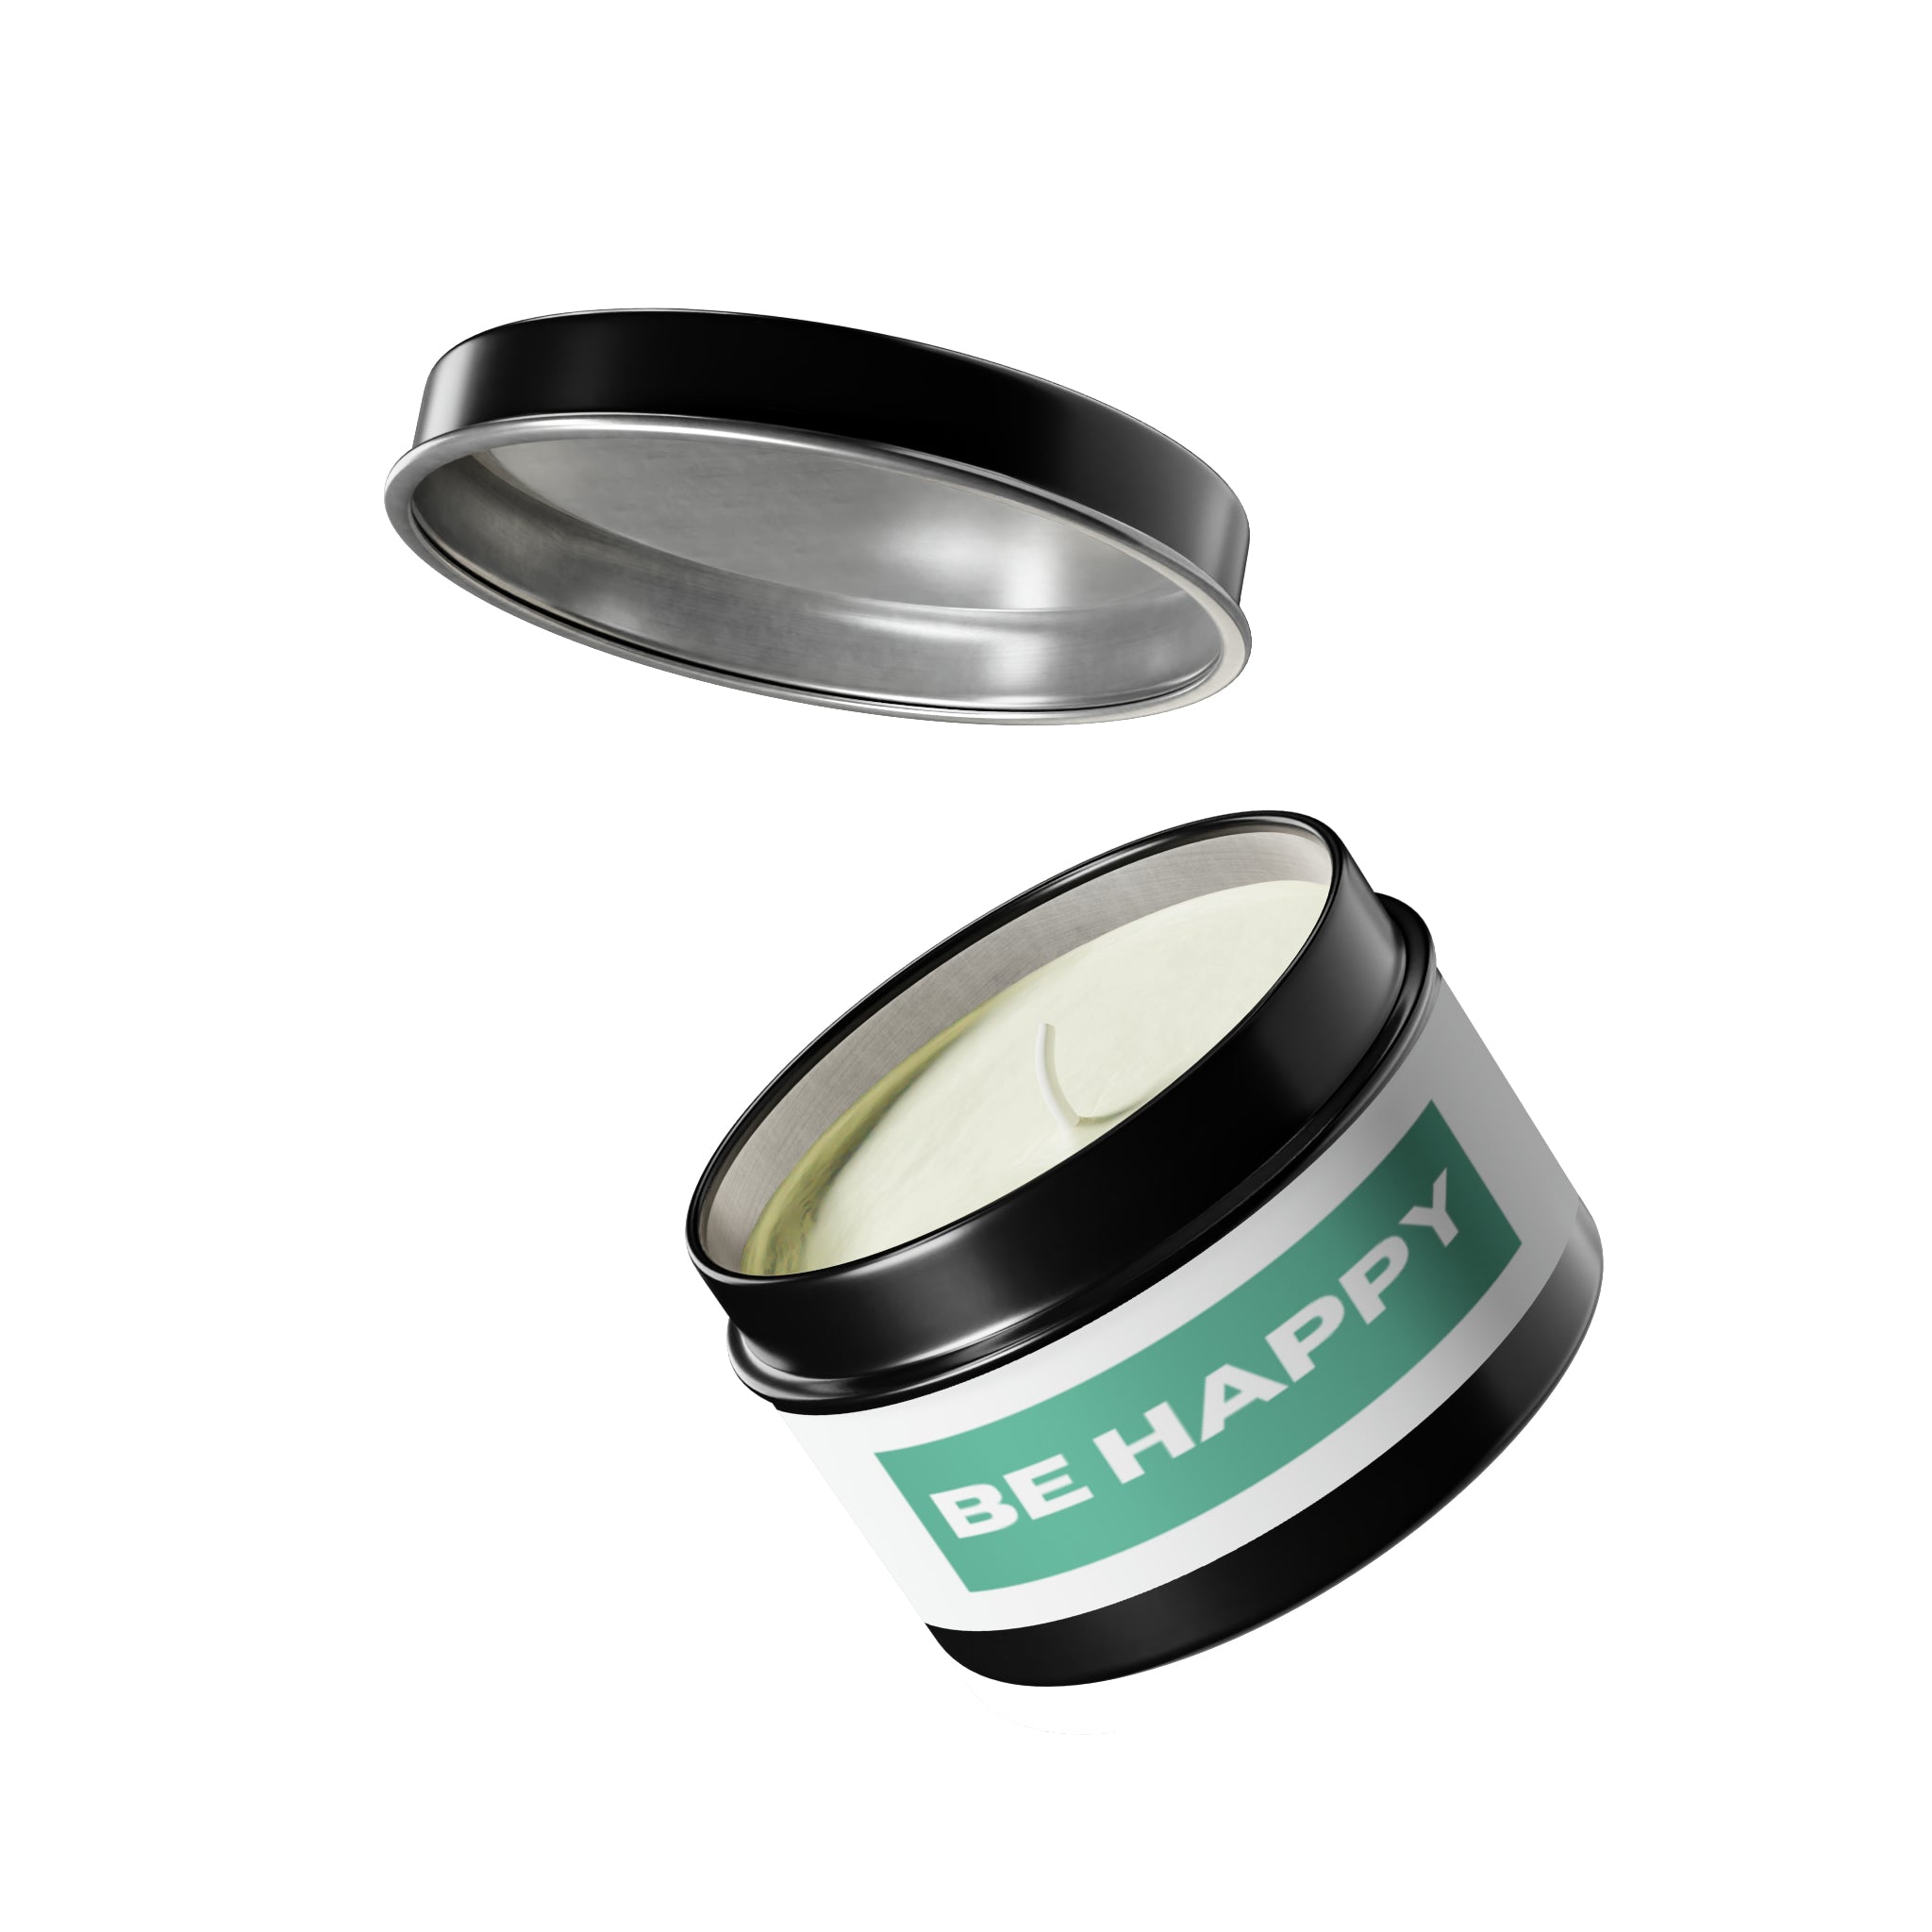 “Be Happy” Tin Candles